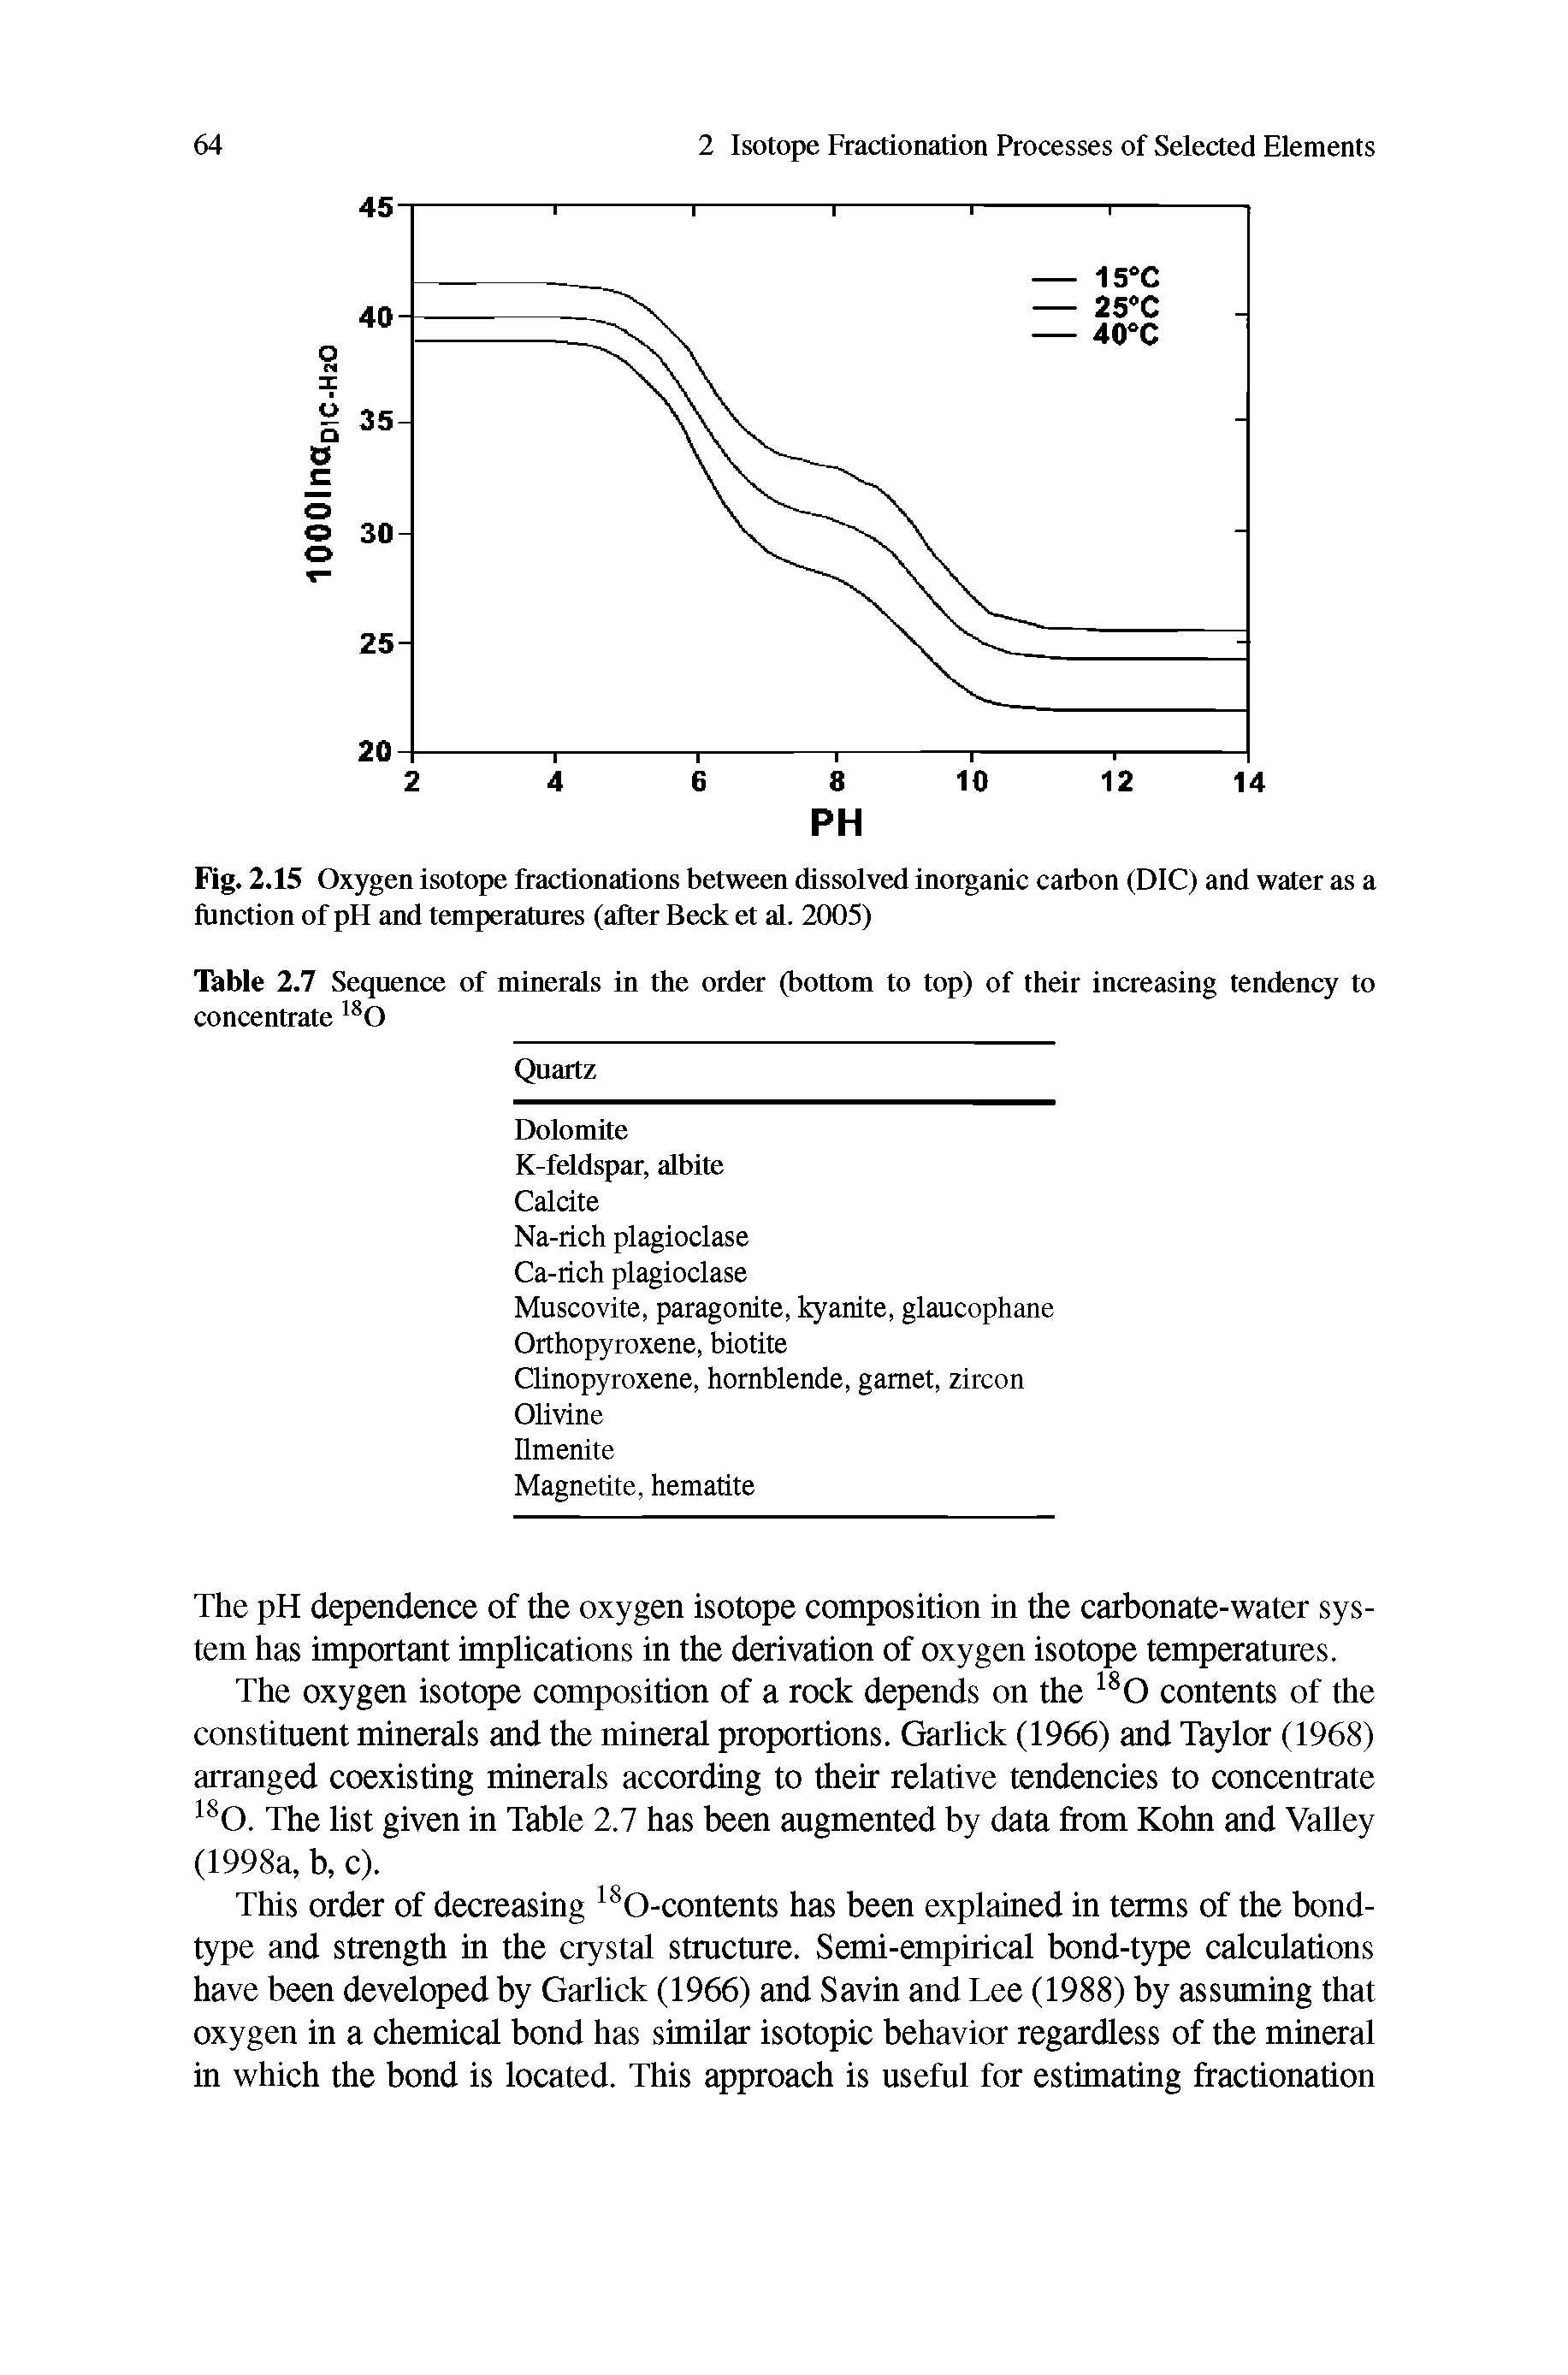 Fig. 2.15 Oxygen isotope fractionations between dissolved inorganic carbon (DIC) and water as a function of pH and temperatures (after Beck et al. 2005)...